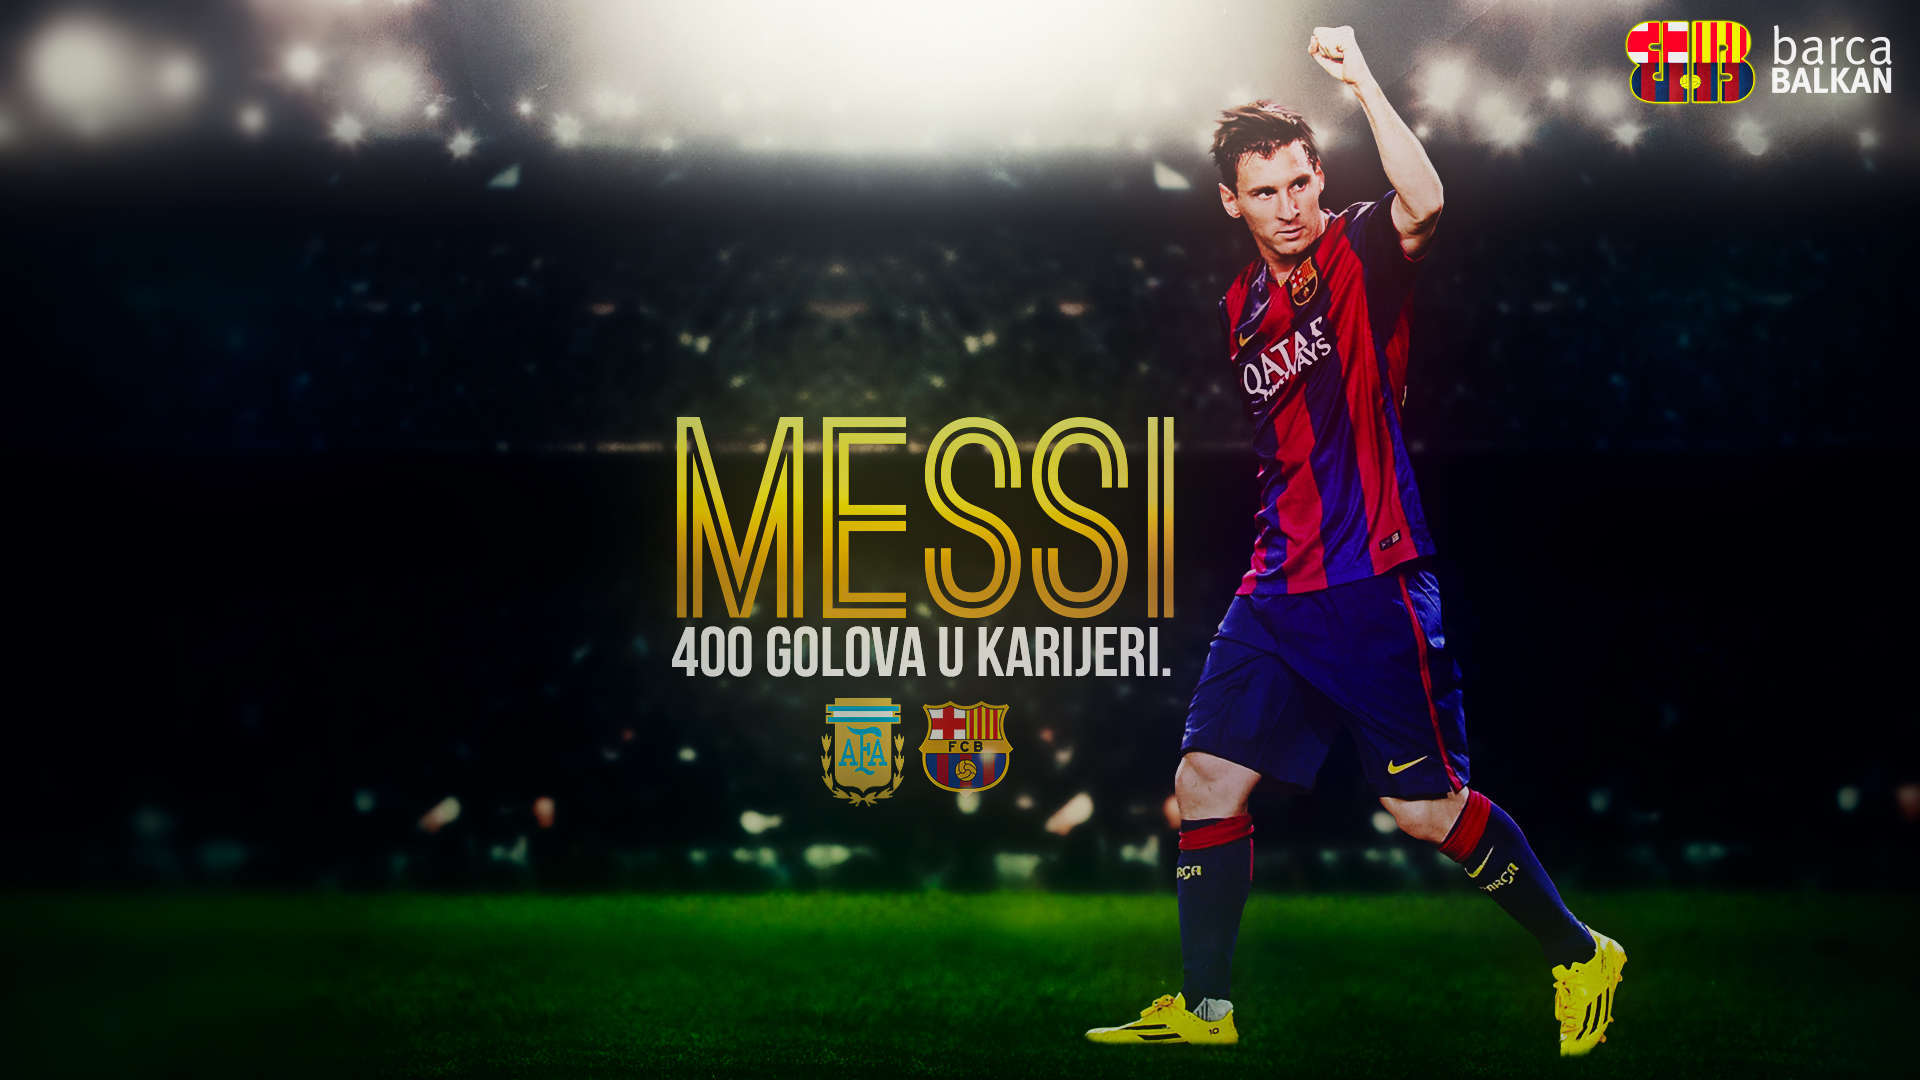 Lionel Messi HD wallpapers free download